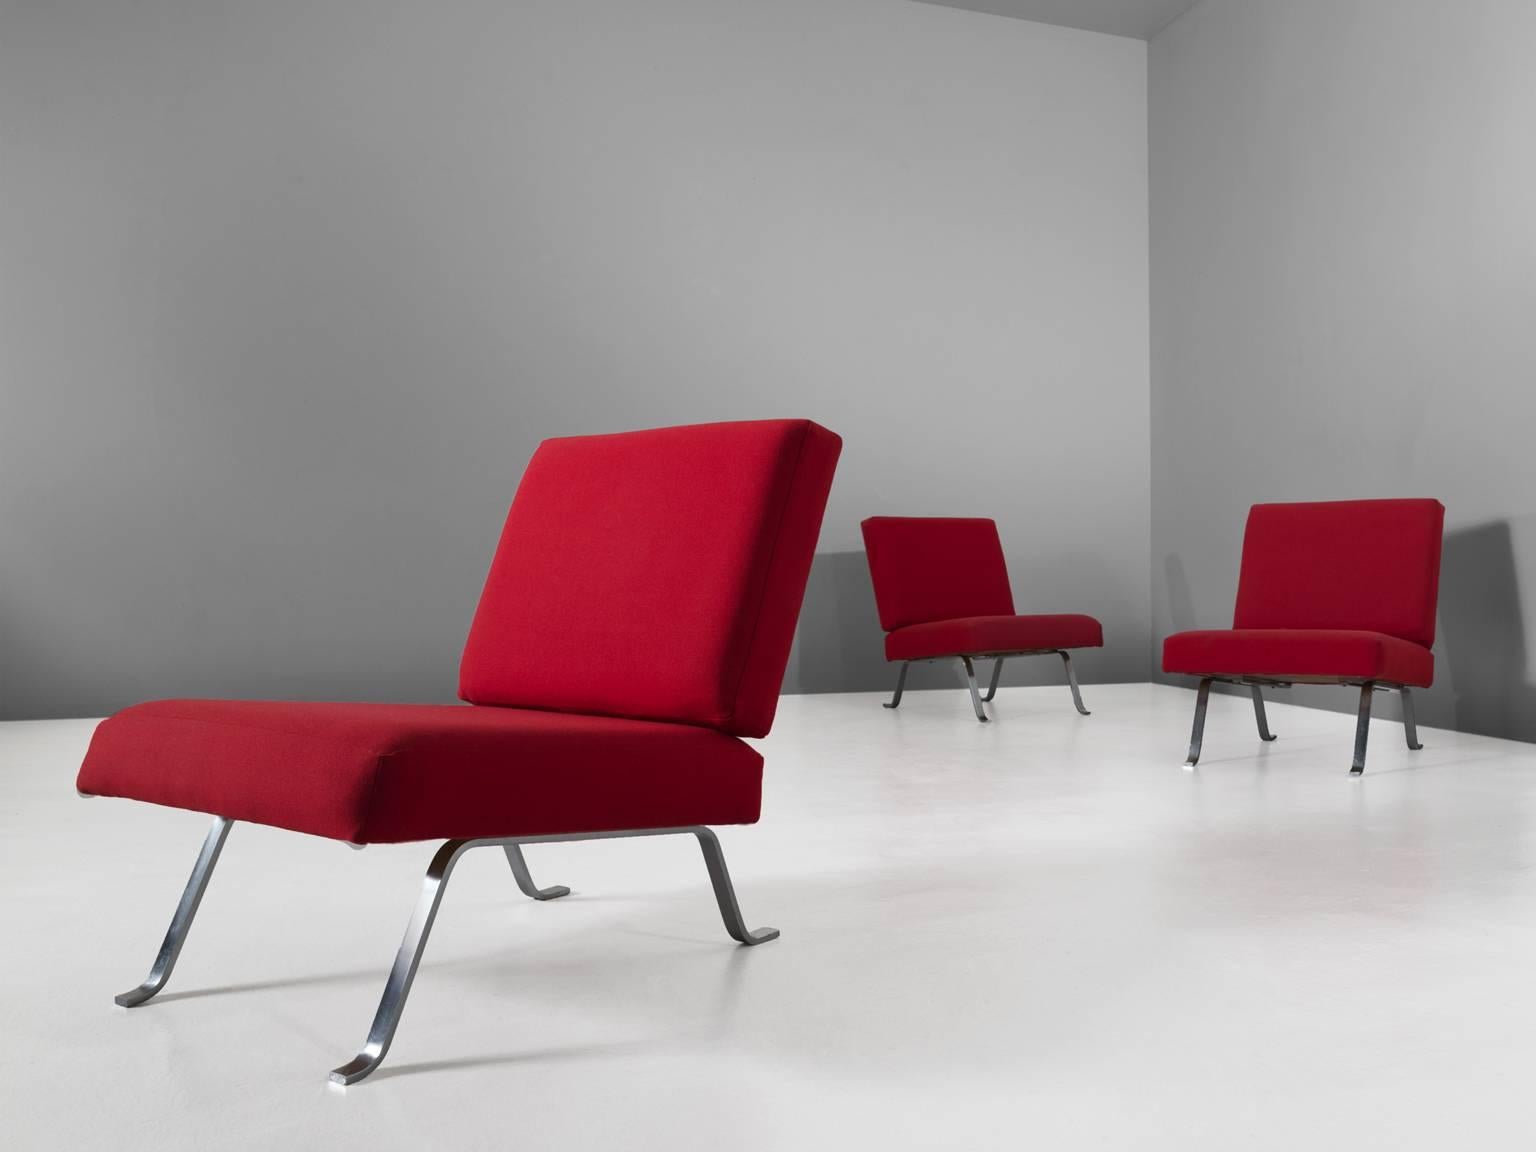 Set of three easy chairs, in steel and fabric, by Hein Salomonson for AP Originals, the Netherlands 1960s.
Set of three lounge chairs by designer Hein Salomonson for the Dutch manufacturer Polak. These chairs have a very modern expression. The